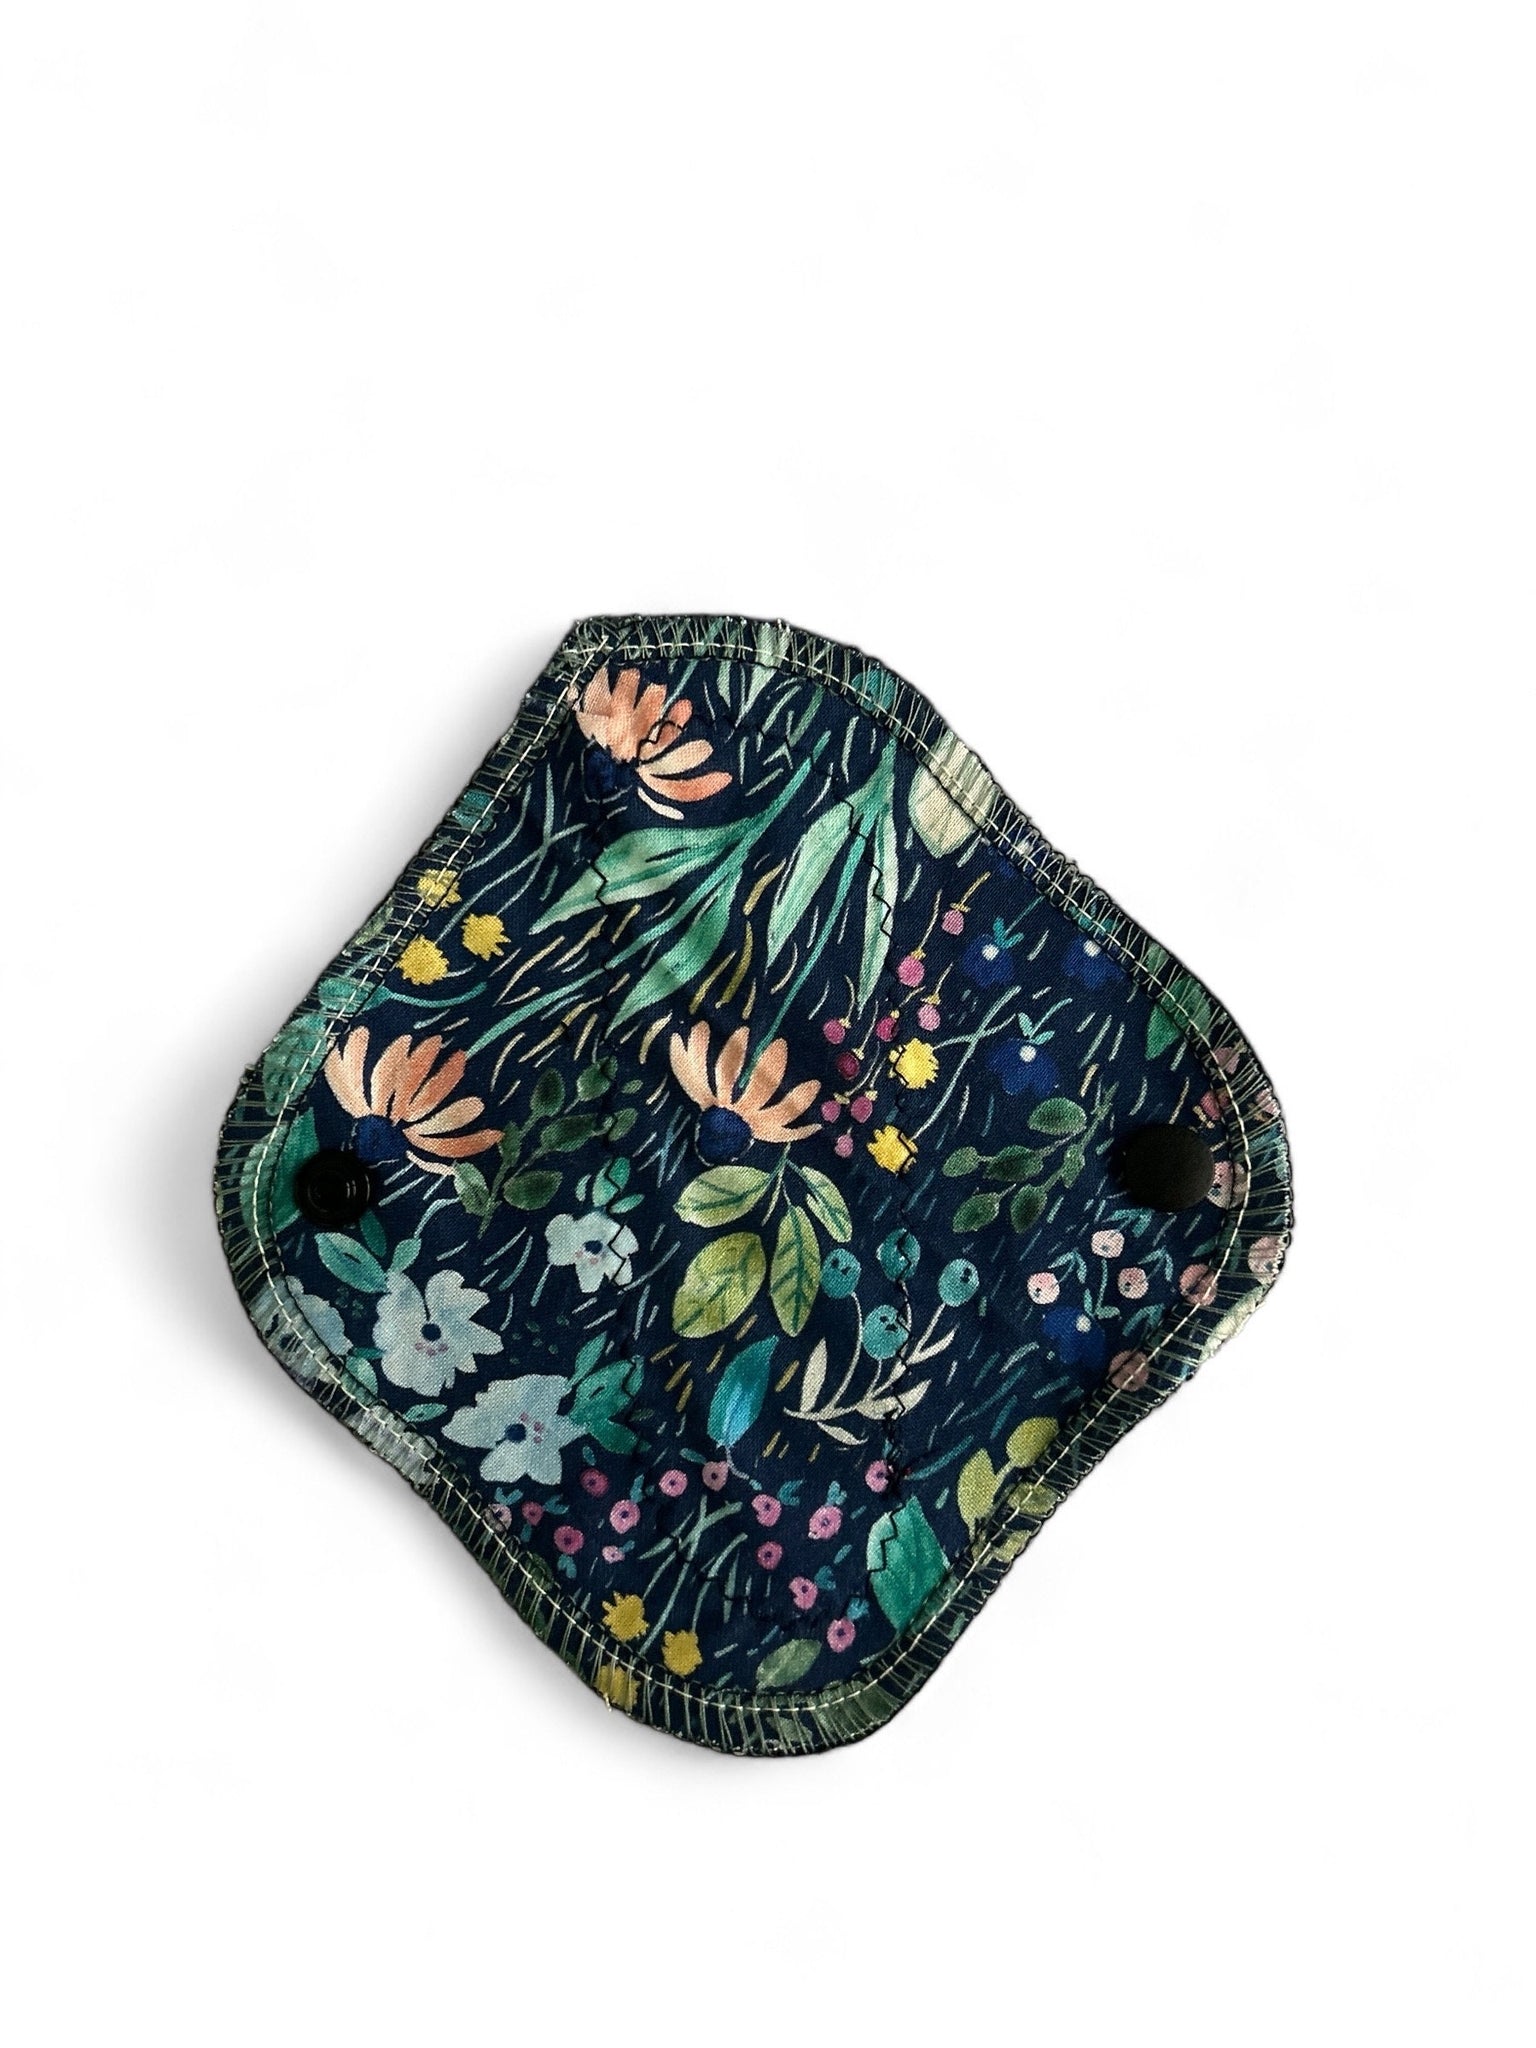 Reusable Cloth Pad (Liner) Light Absorbency - 6 inch, snap closure, cloth pads, blue floral